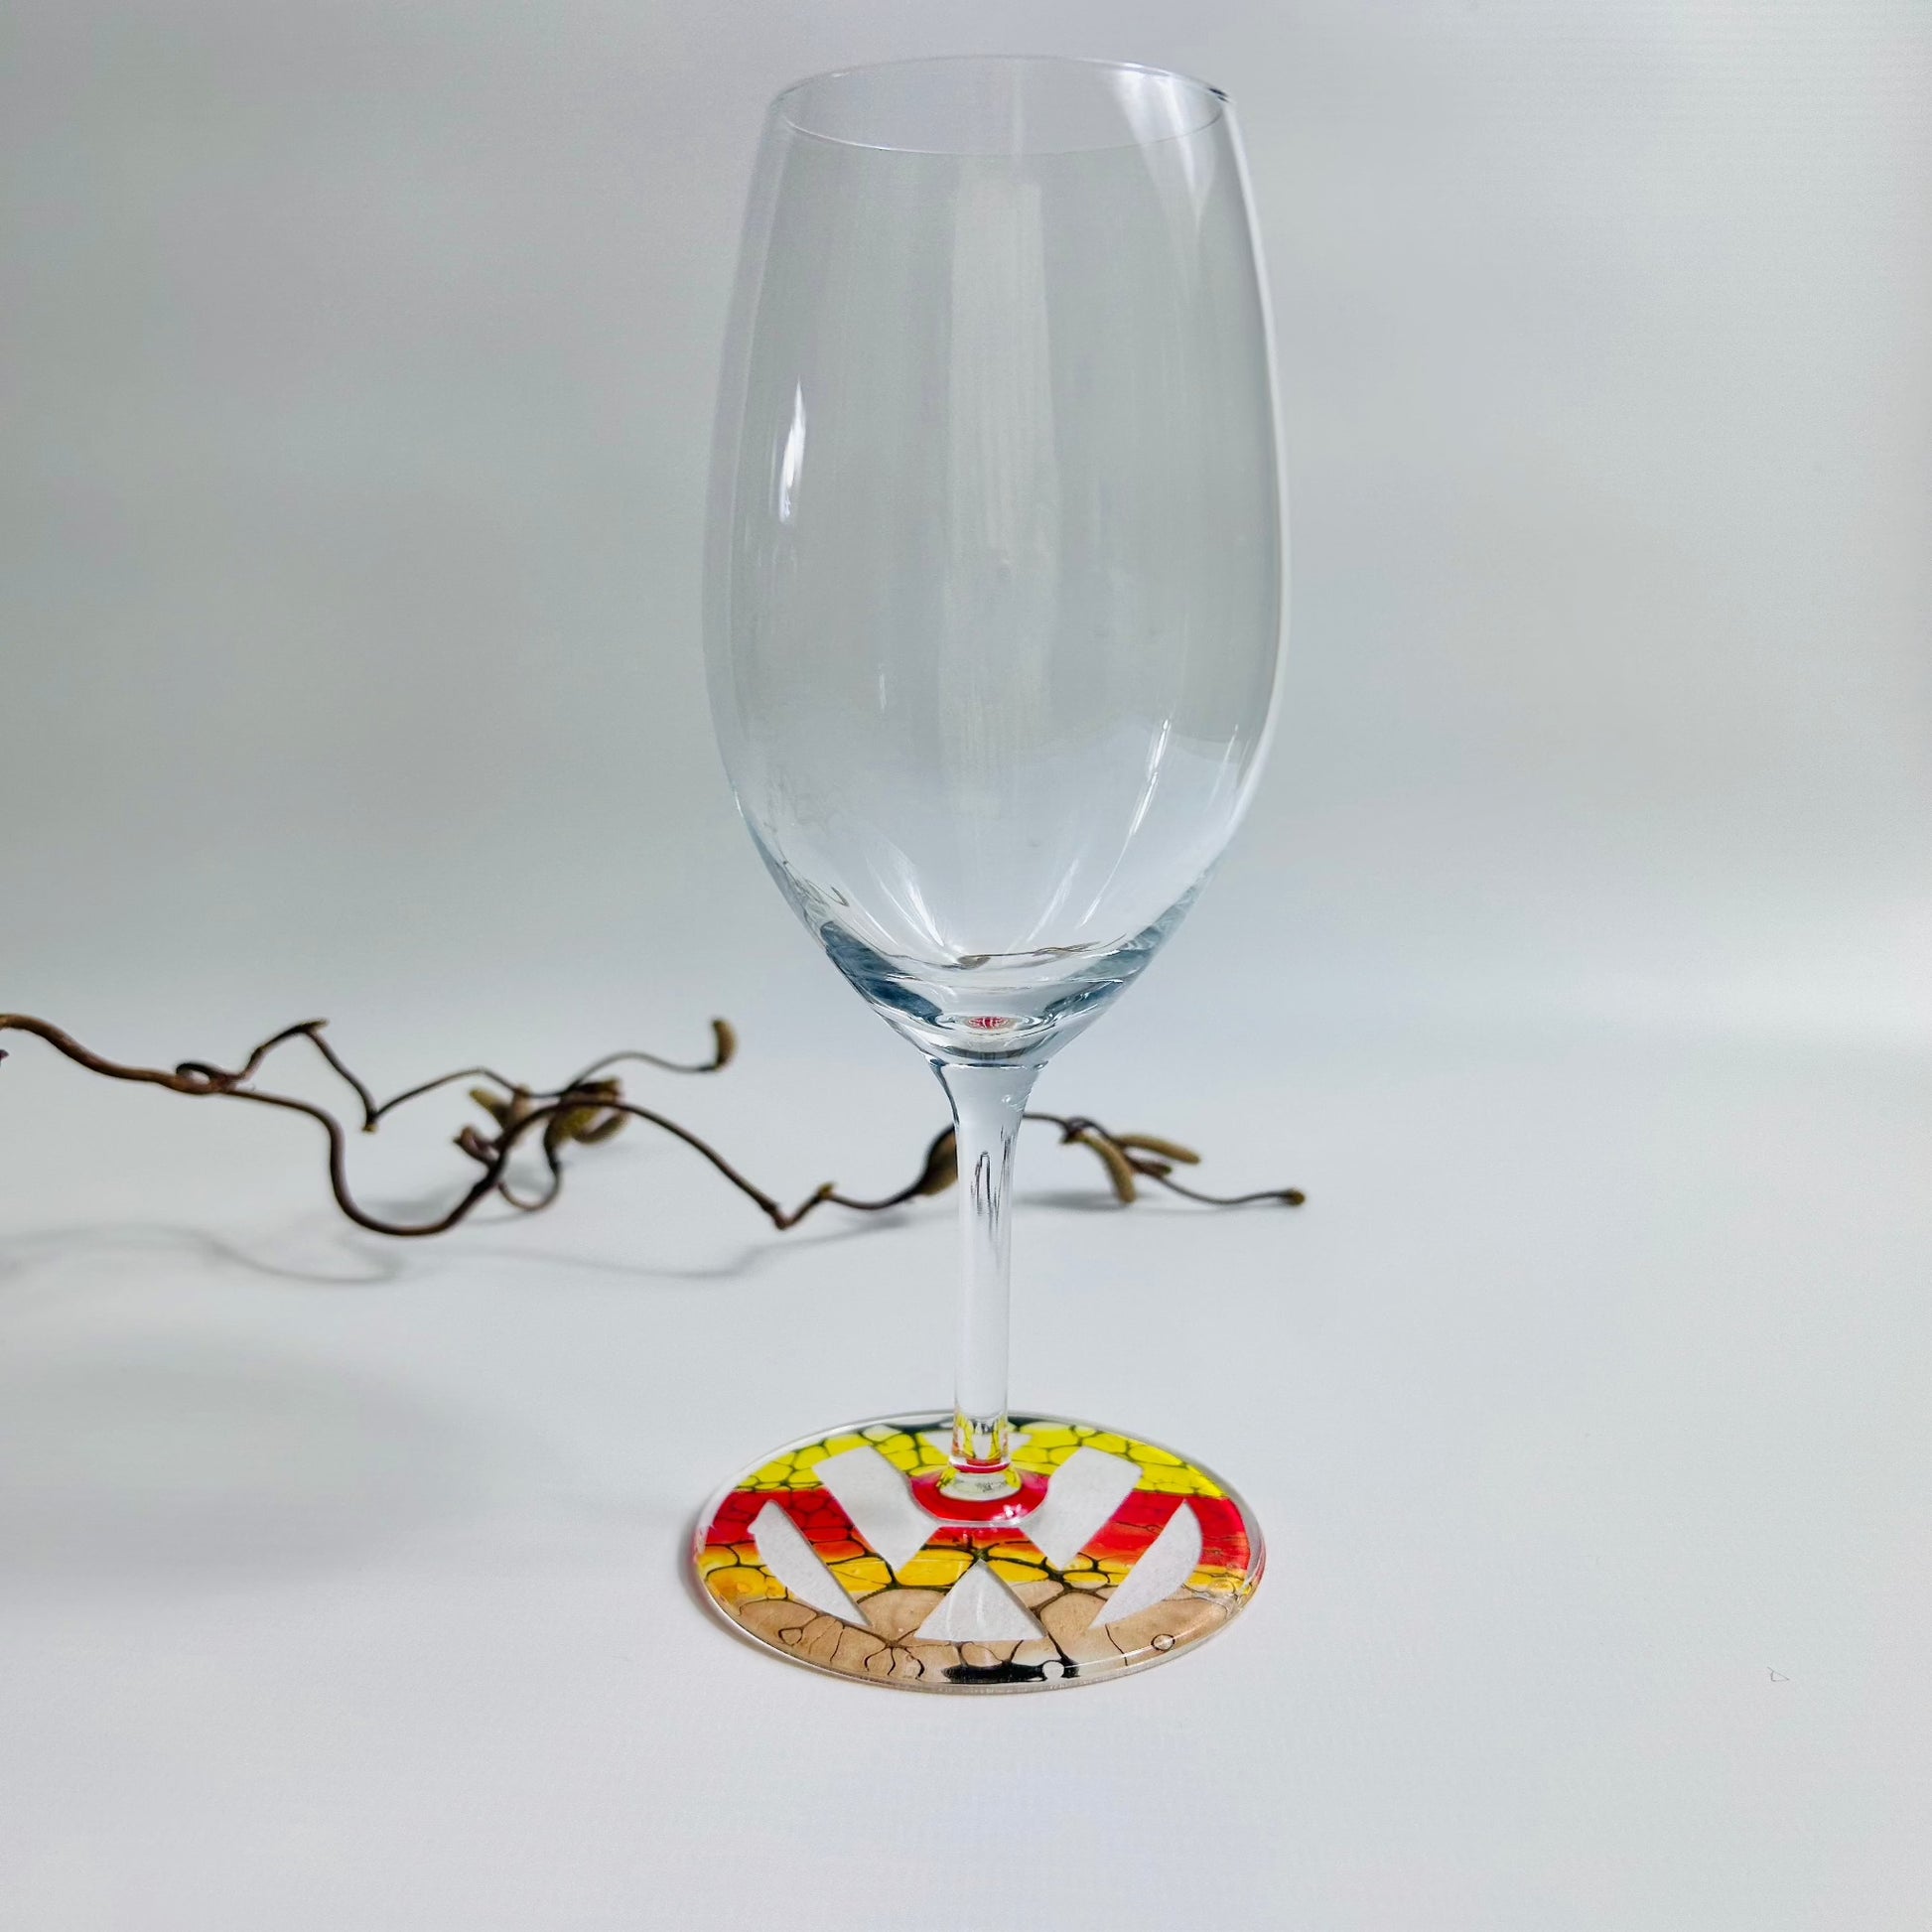 Prosecco glass with yellow and red fluid art design logo on the base, sealed with resin